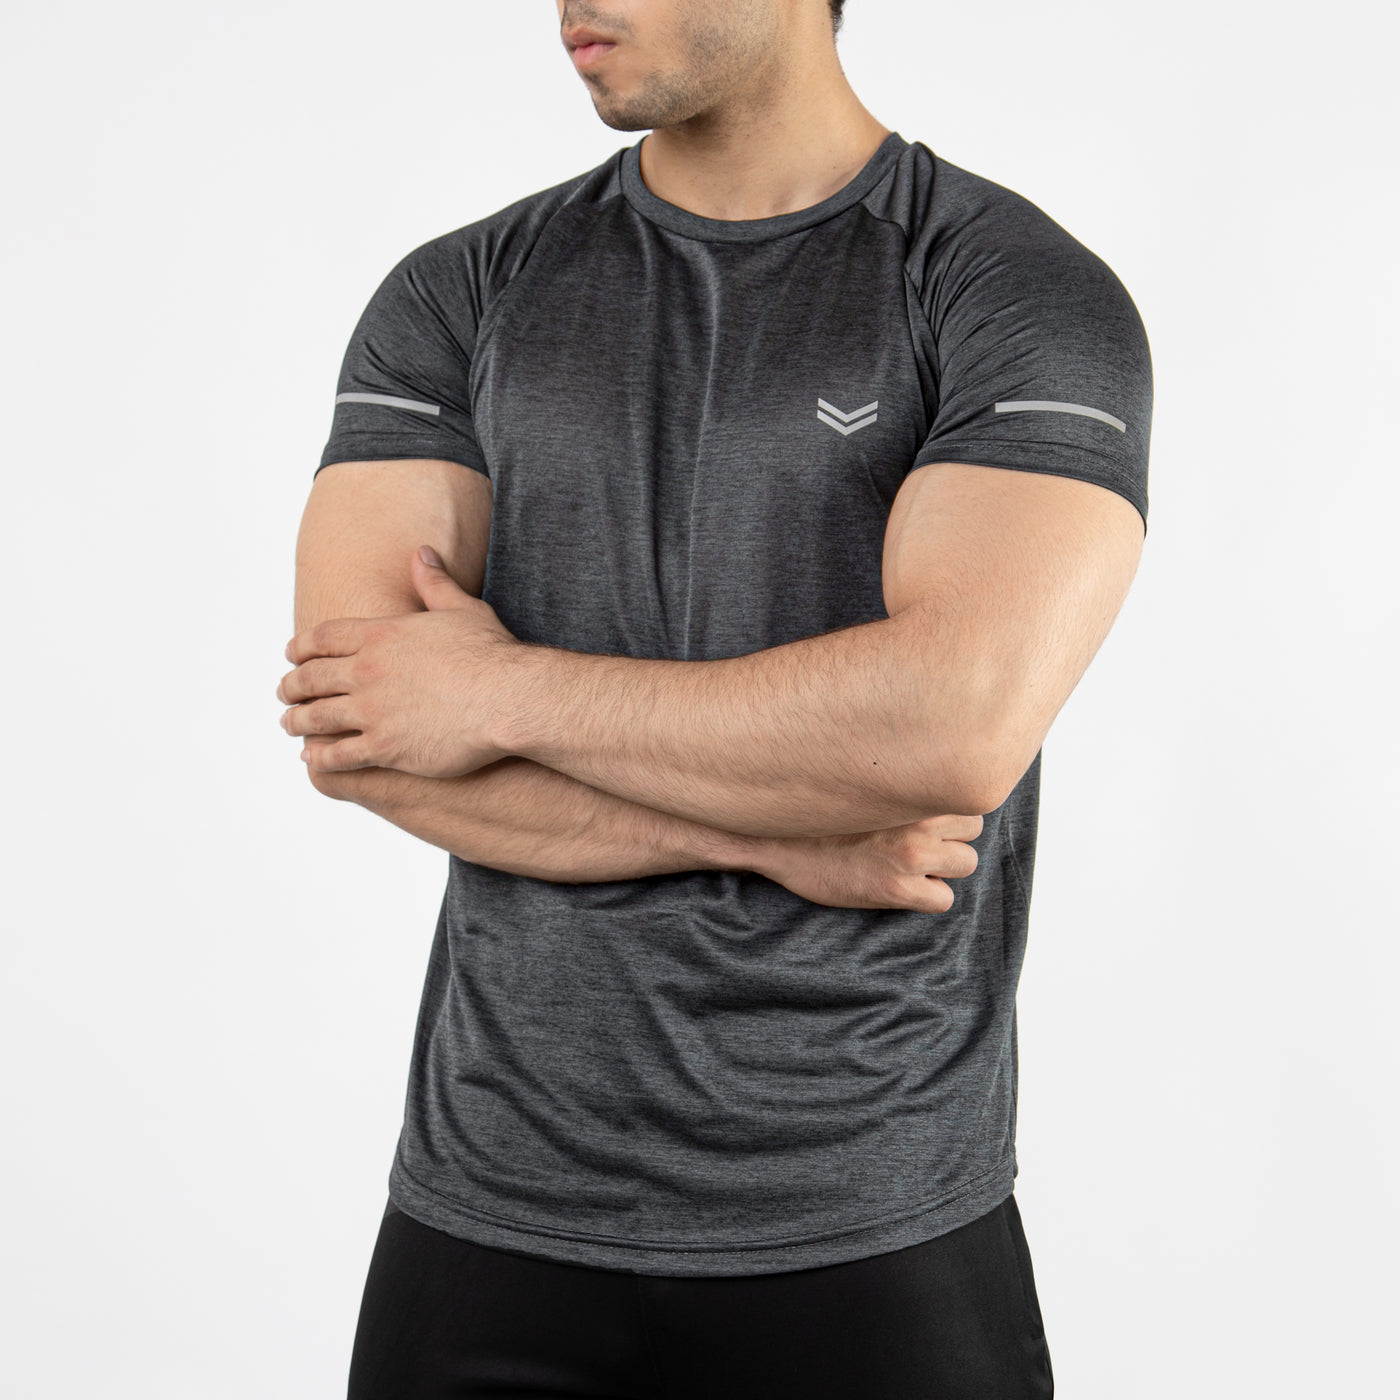 Textured Charcoal Quick Dry T-Shirt With Reflective Detailing